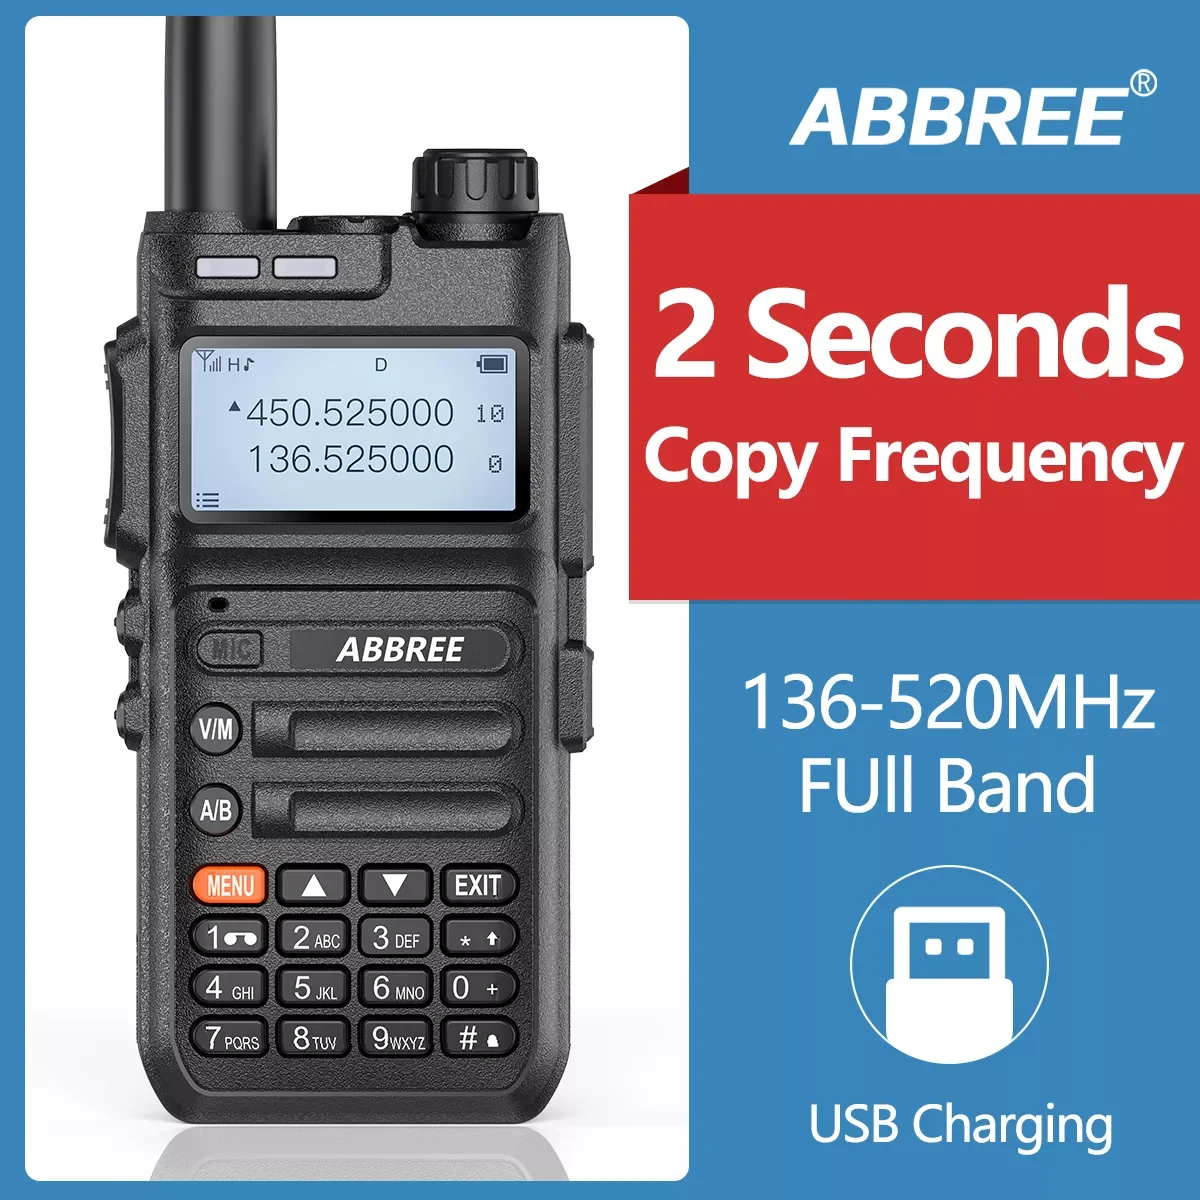 AR-F5 Scanner Frequency Walkie-talkie Automatic Wireless Copy Frequency 10W Powerful 5800mAh support USB Charging Radio